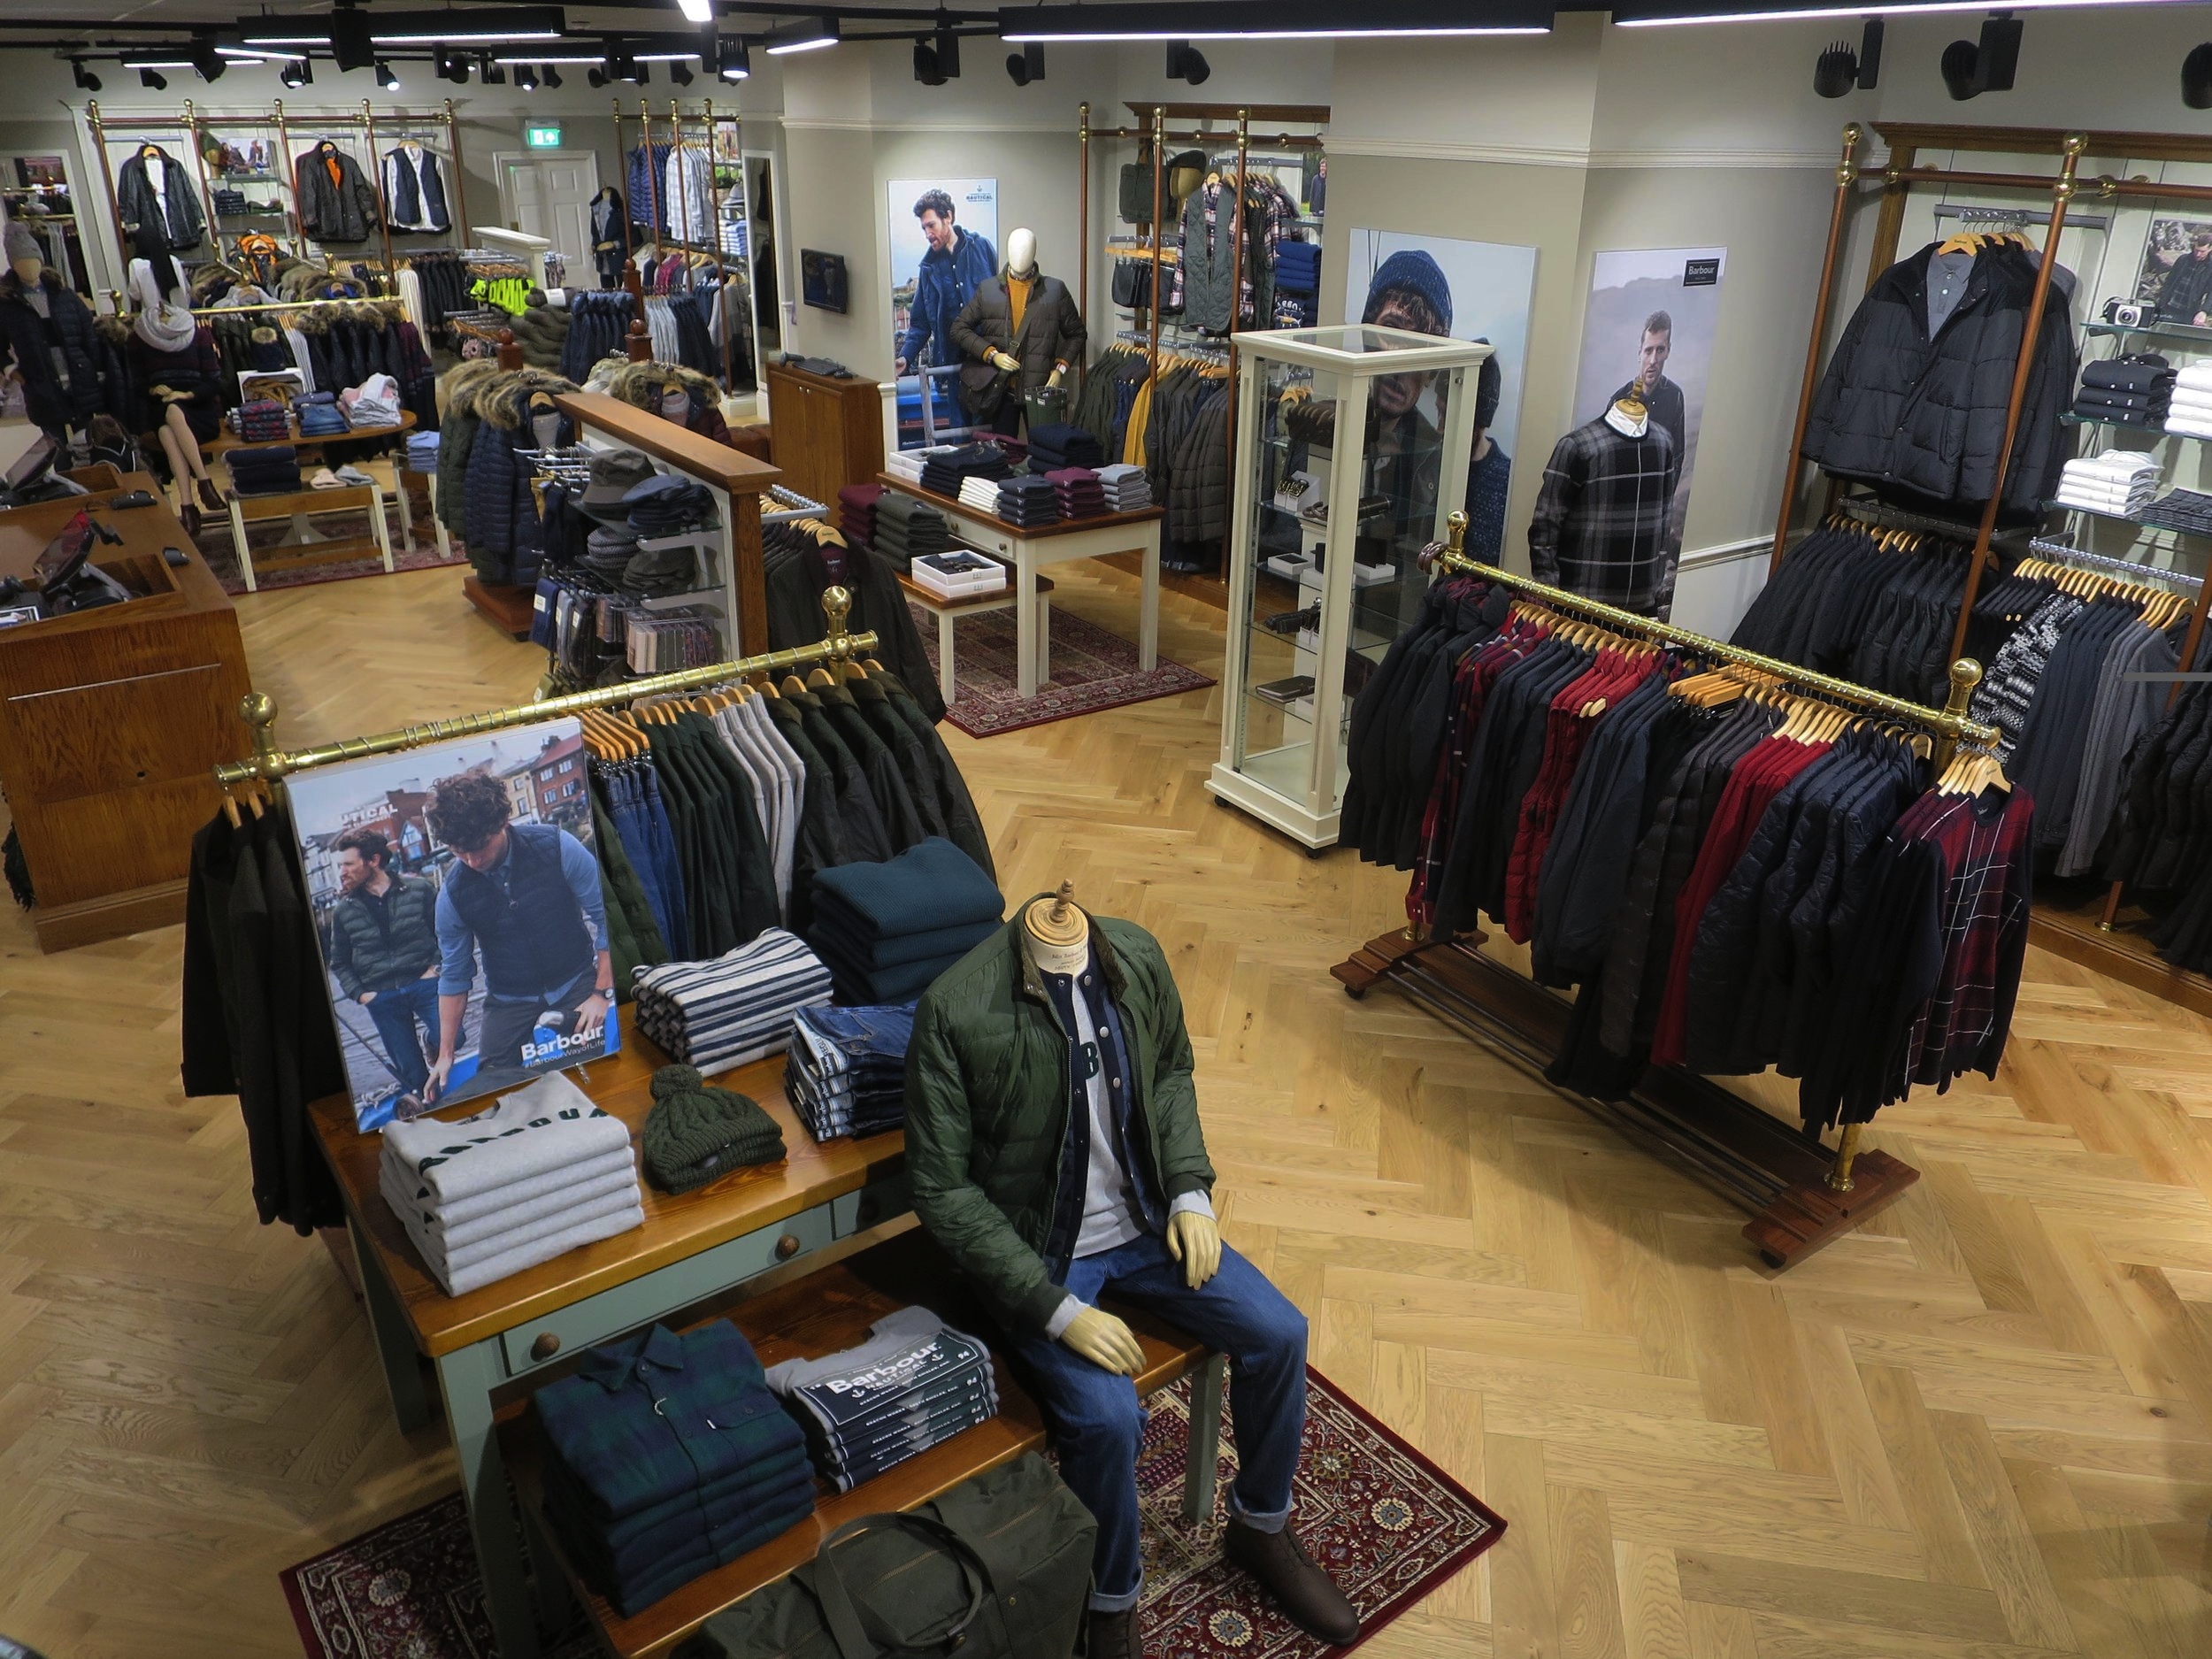 barbour store